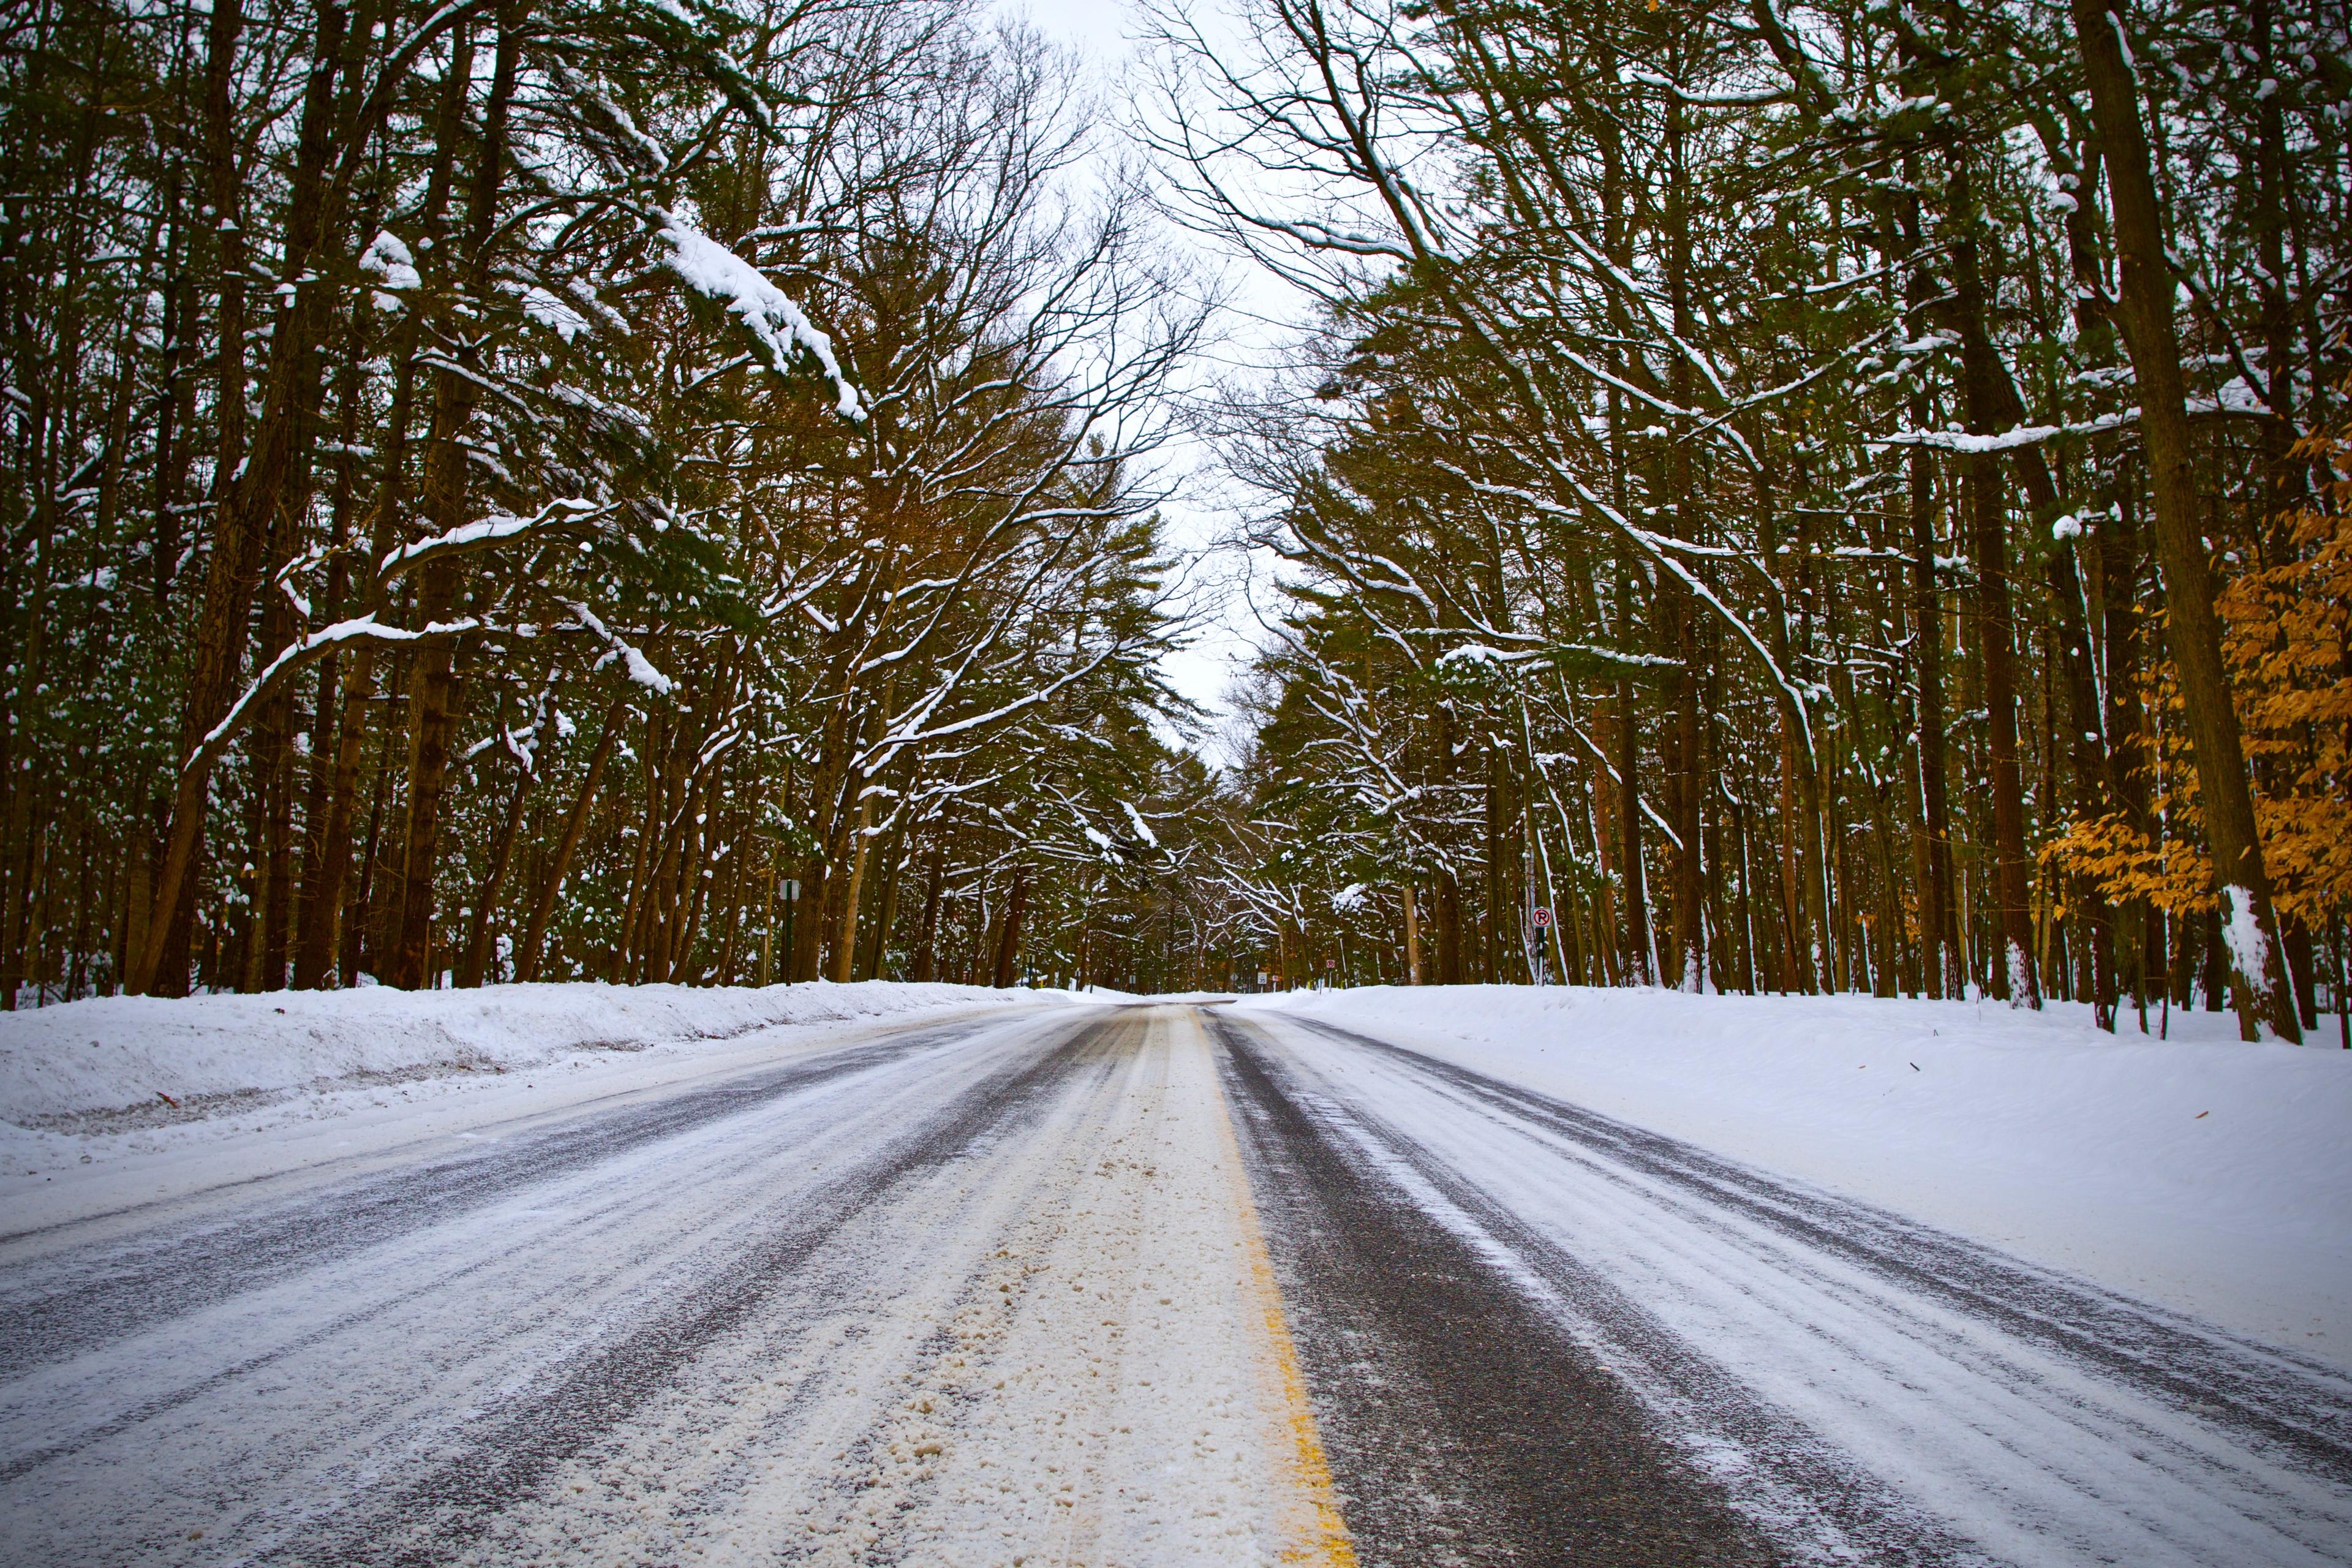 A snowy road lined with trees